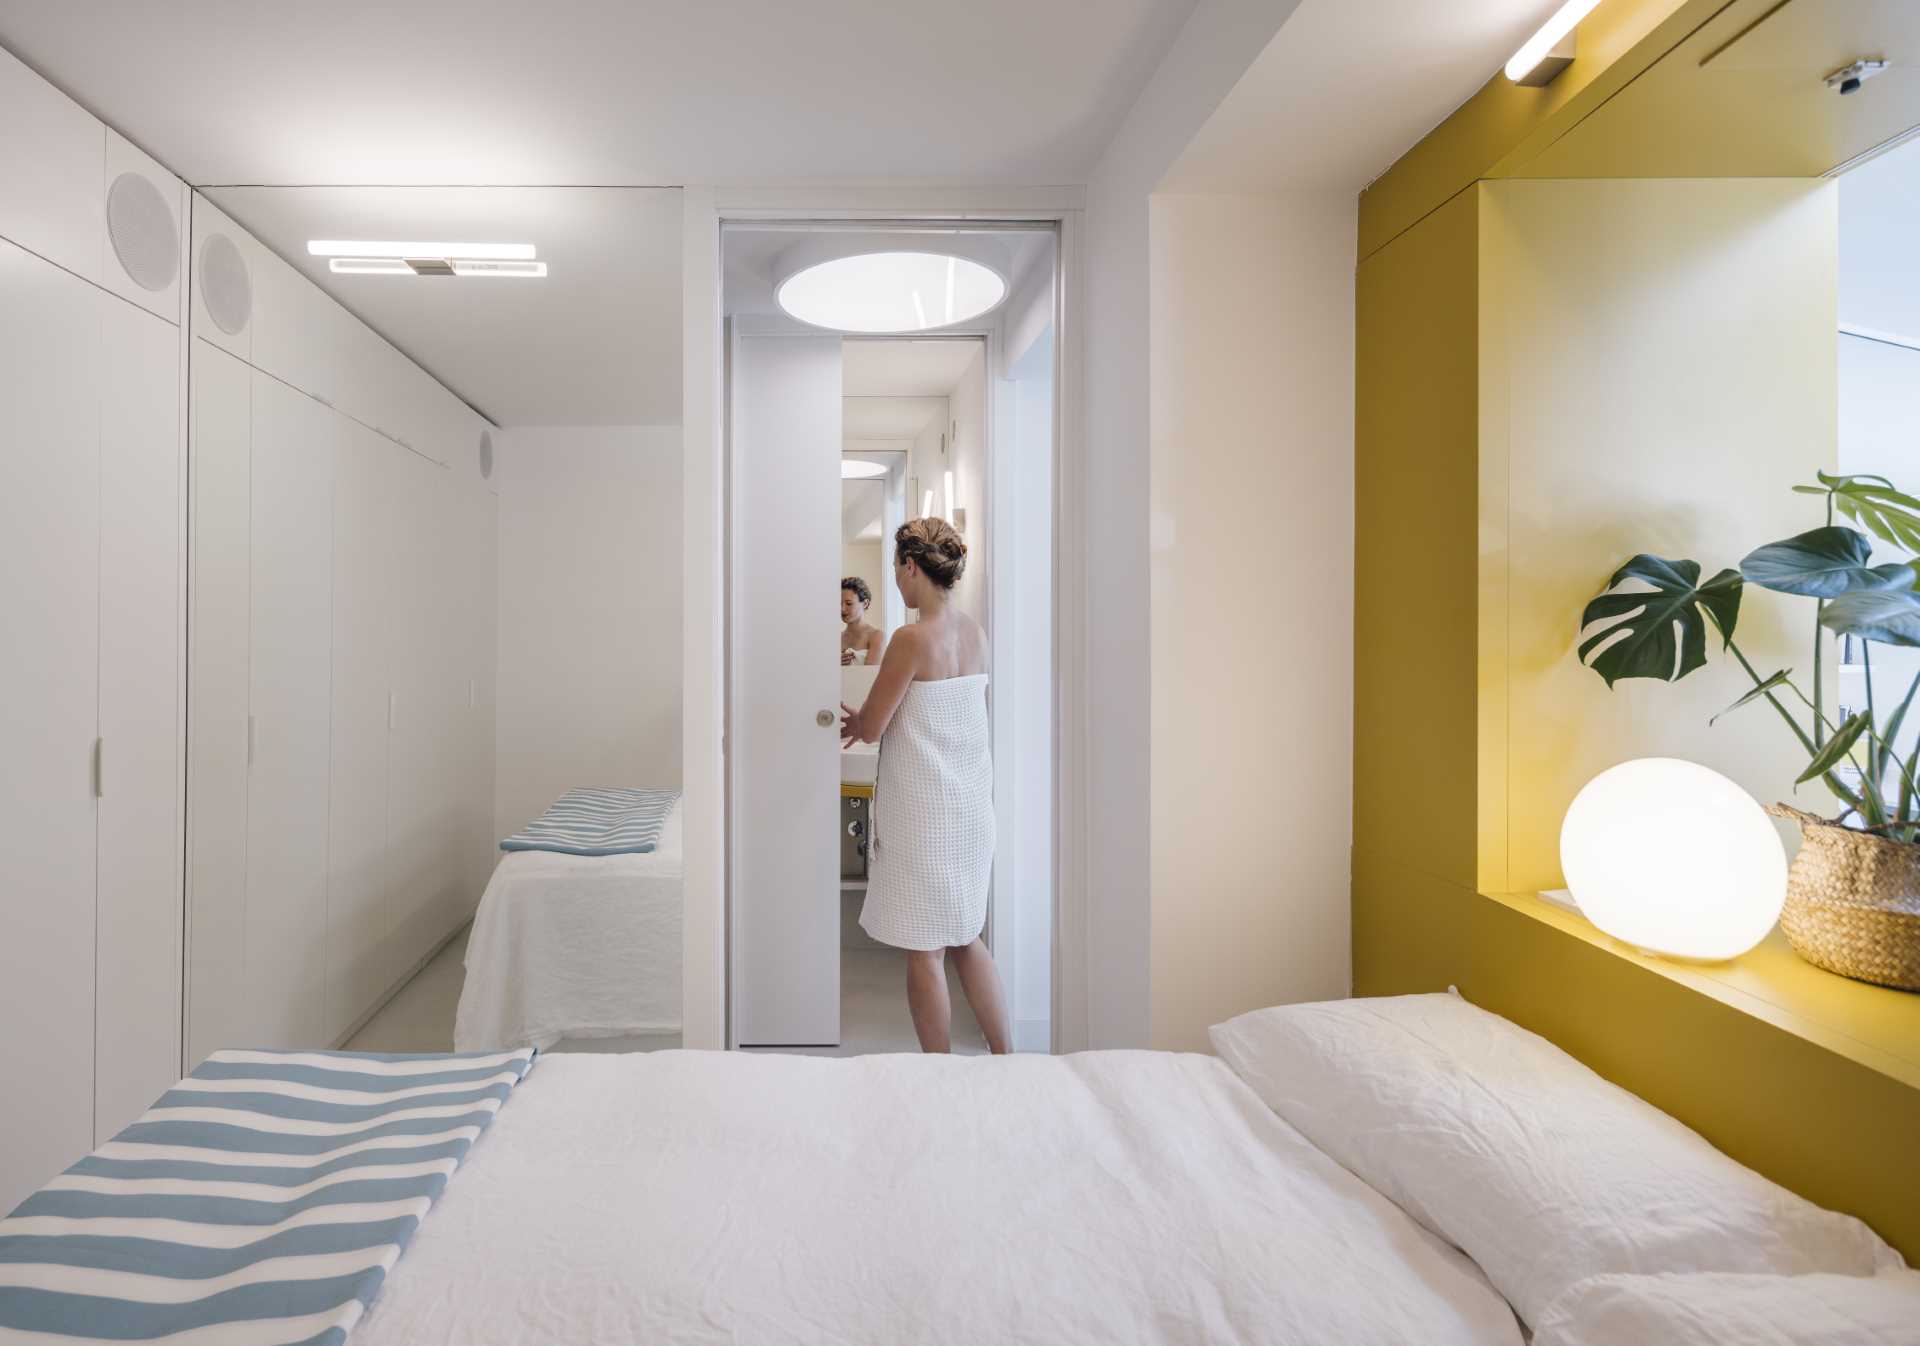 The bedroom of a small apartment includes a floor-to-ceiling mirror that makes the room feel larger.